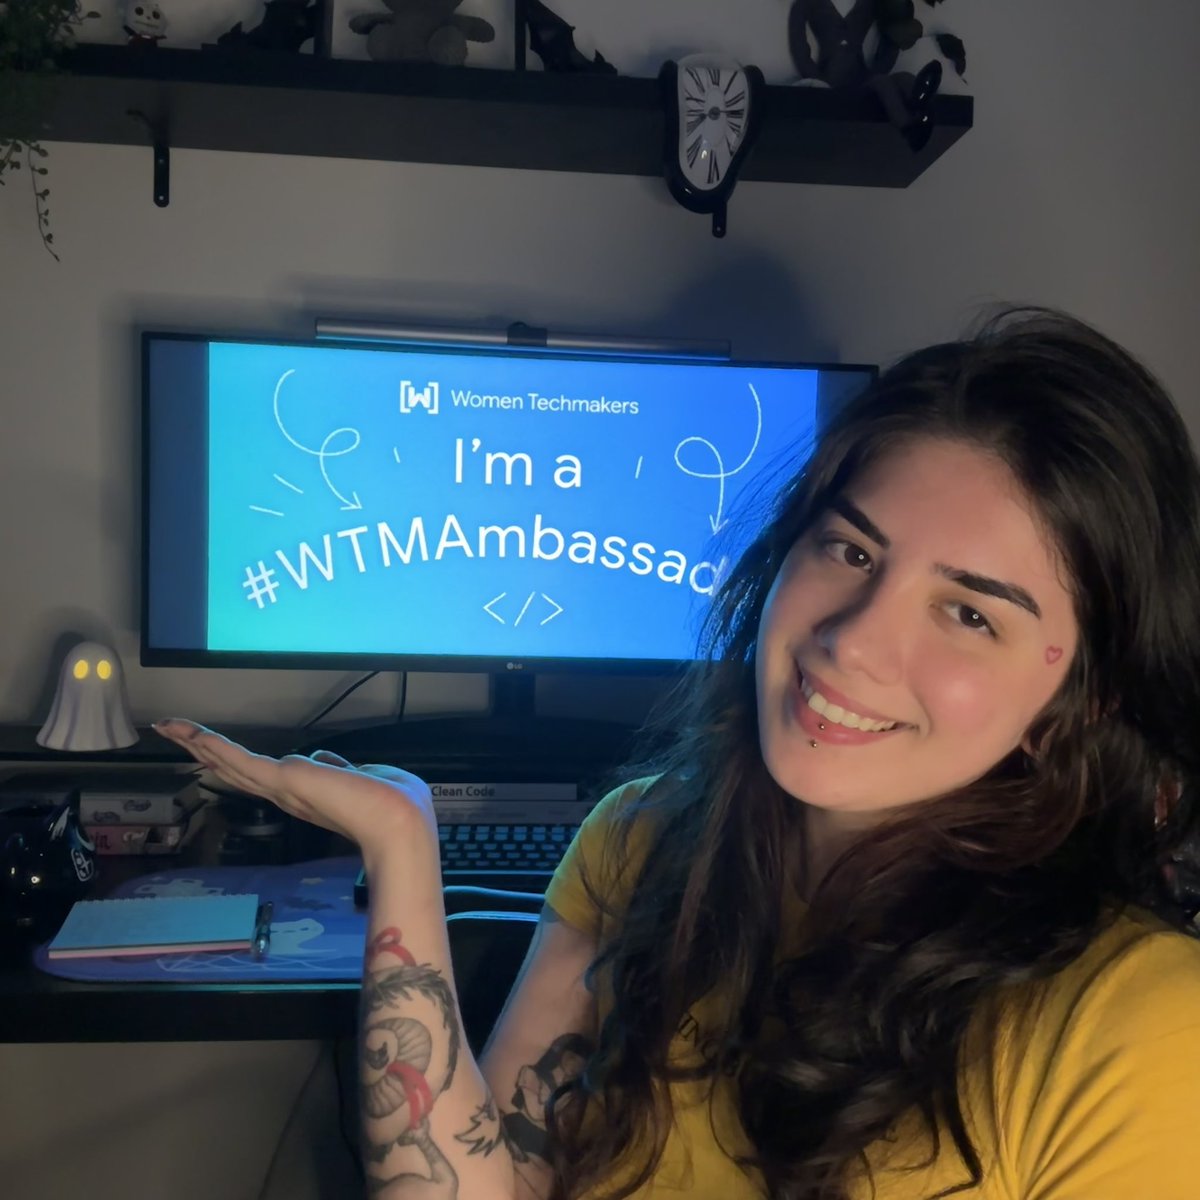 ⚡️ Thrilled to share I've been chosen as a @WomenTechmakers Ambassador at @googledevs! Can't wait to attend events, speak on panels and help empower women in tech. Super excited to represent and inspire girls in STEM! 👩‍💻 #WTMAmbassador